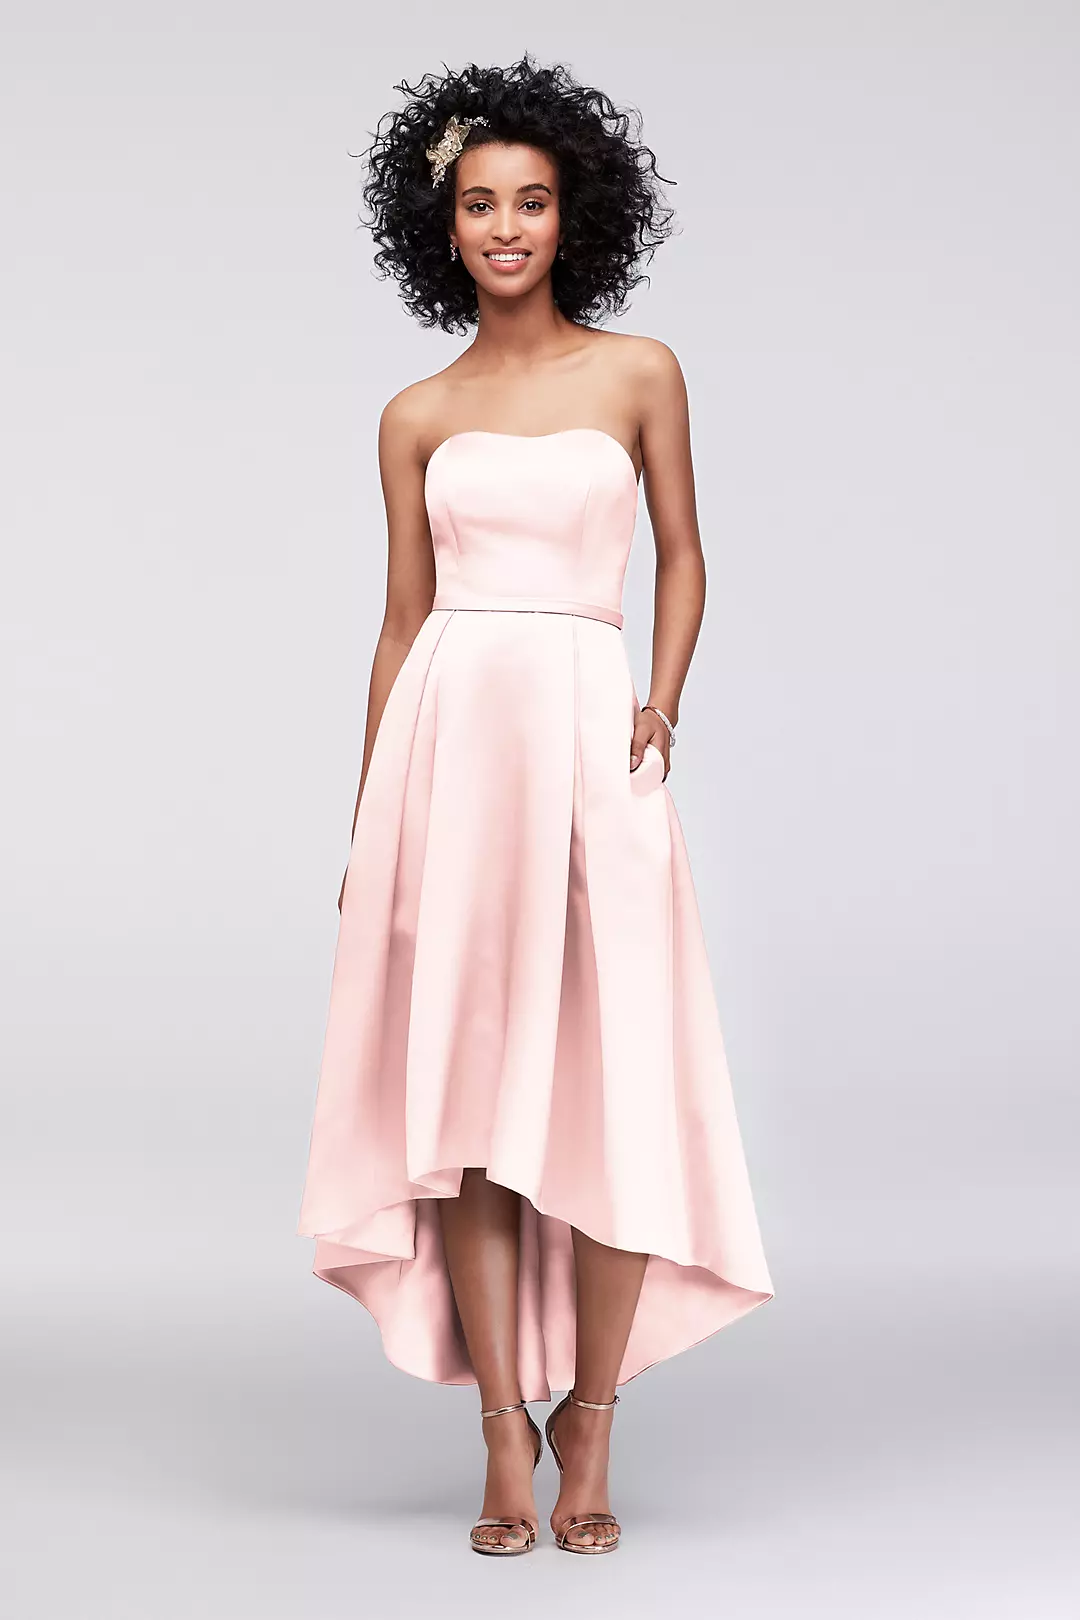 Strapless High-Low Bridesmaid Dress with Pockets Image